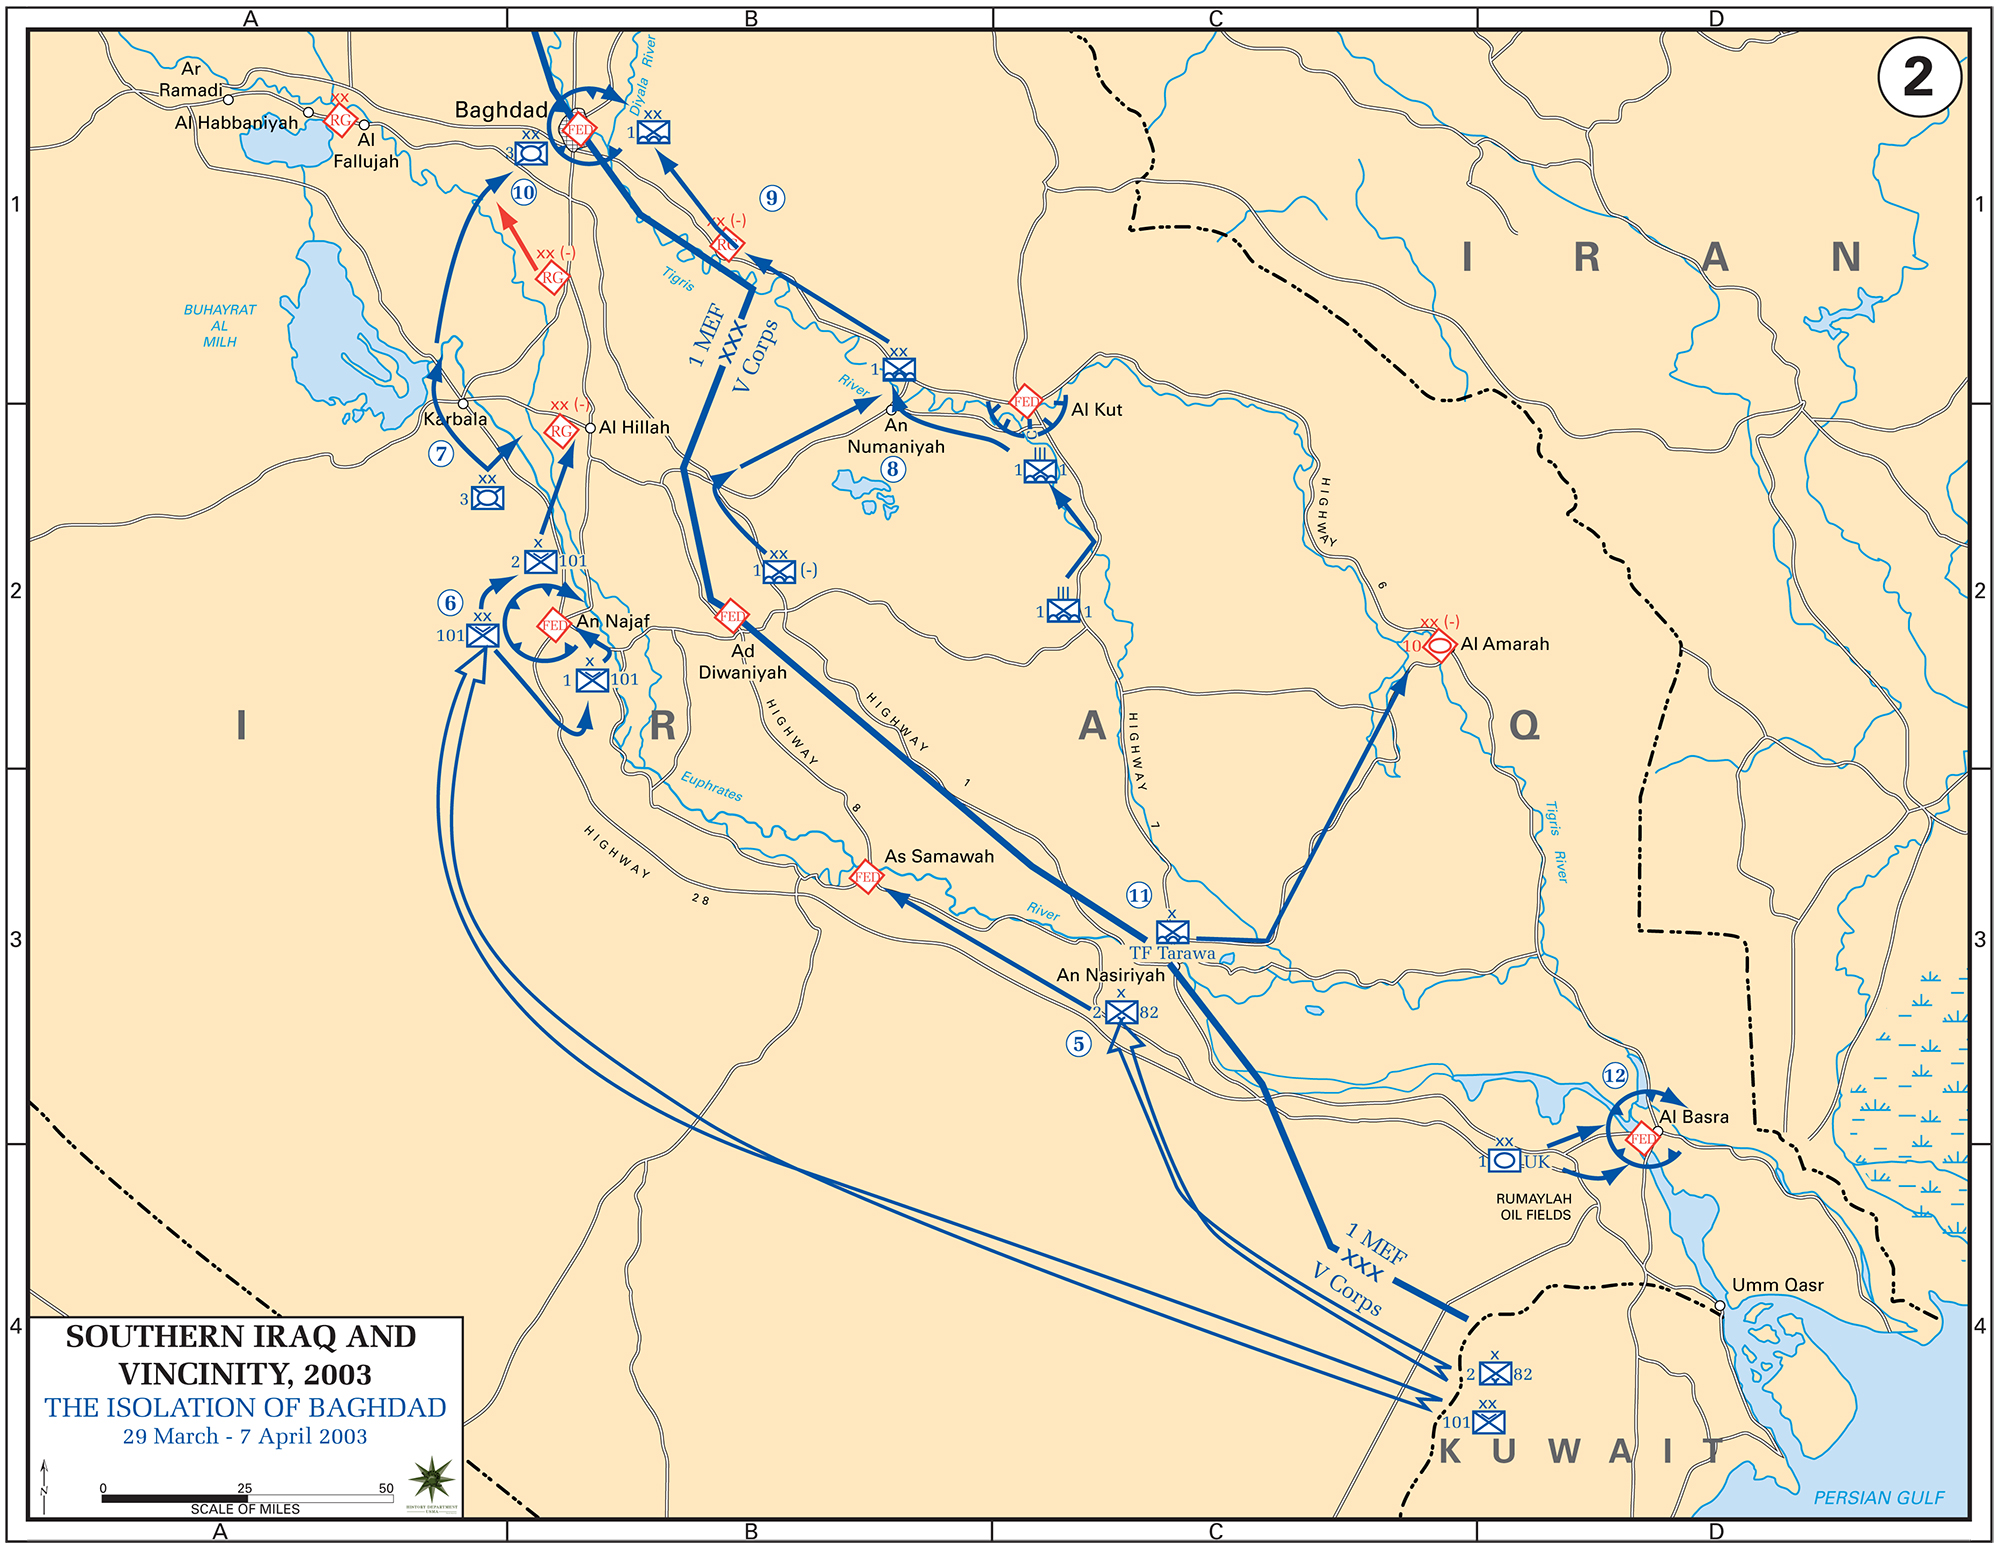 History Map of Iraq 2003. Southern Iraq and Vicinity, The Isolation of Baghdad, March 29 - April 7, 2003.